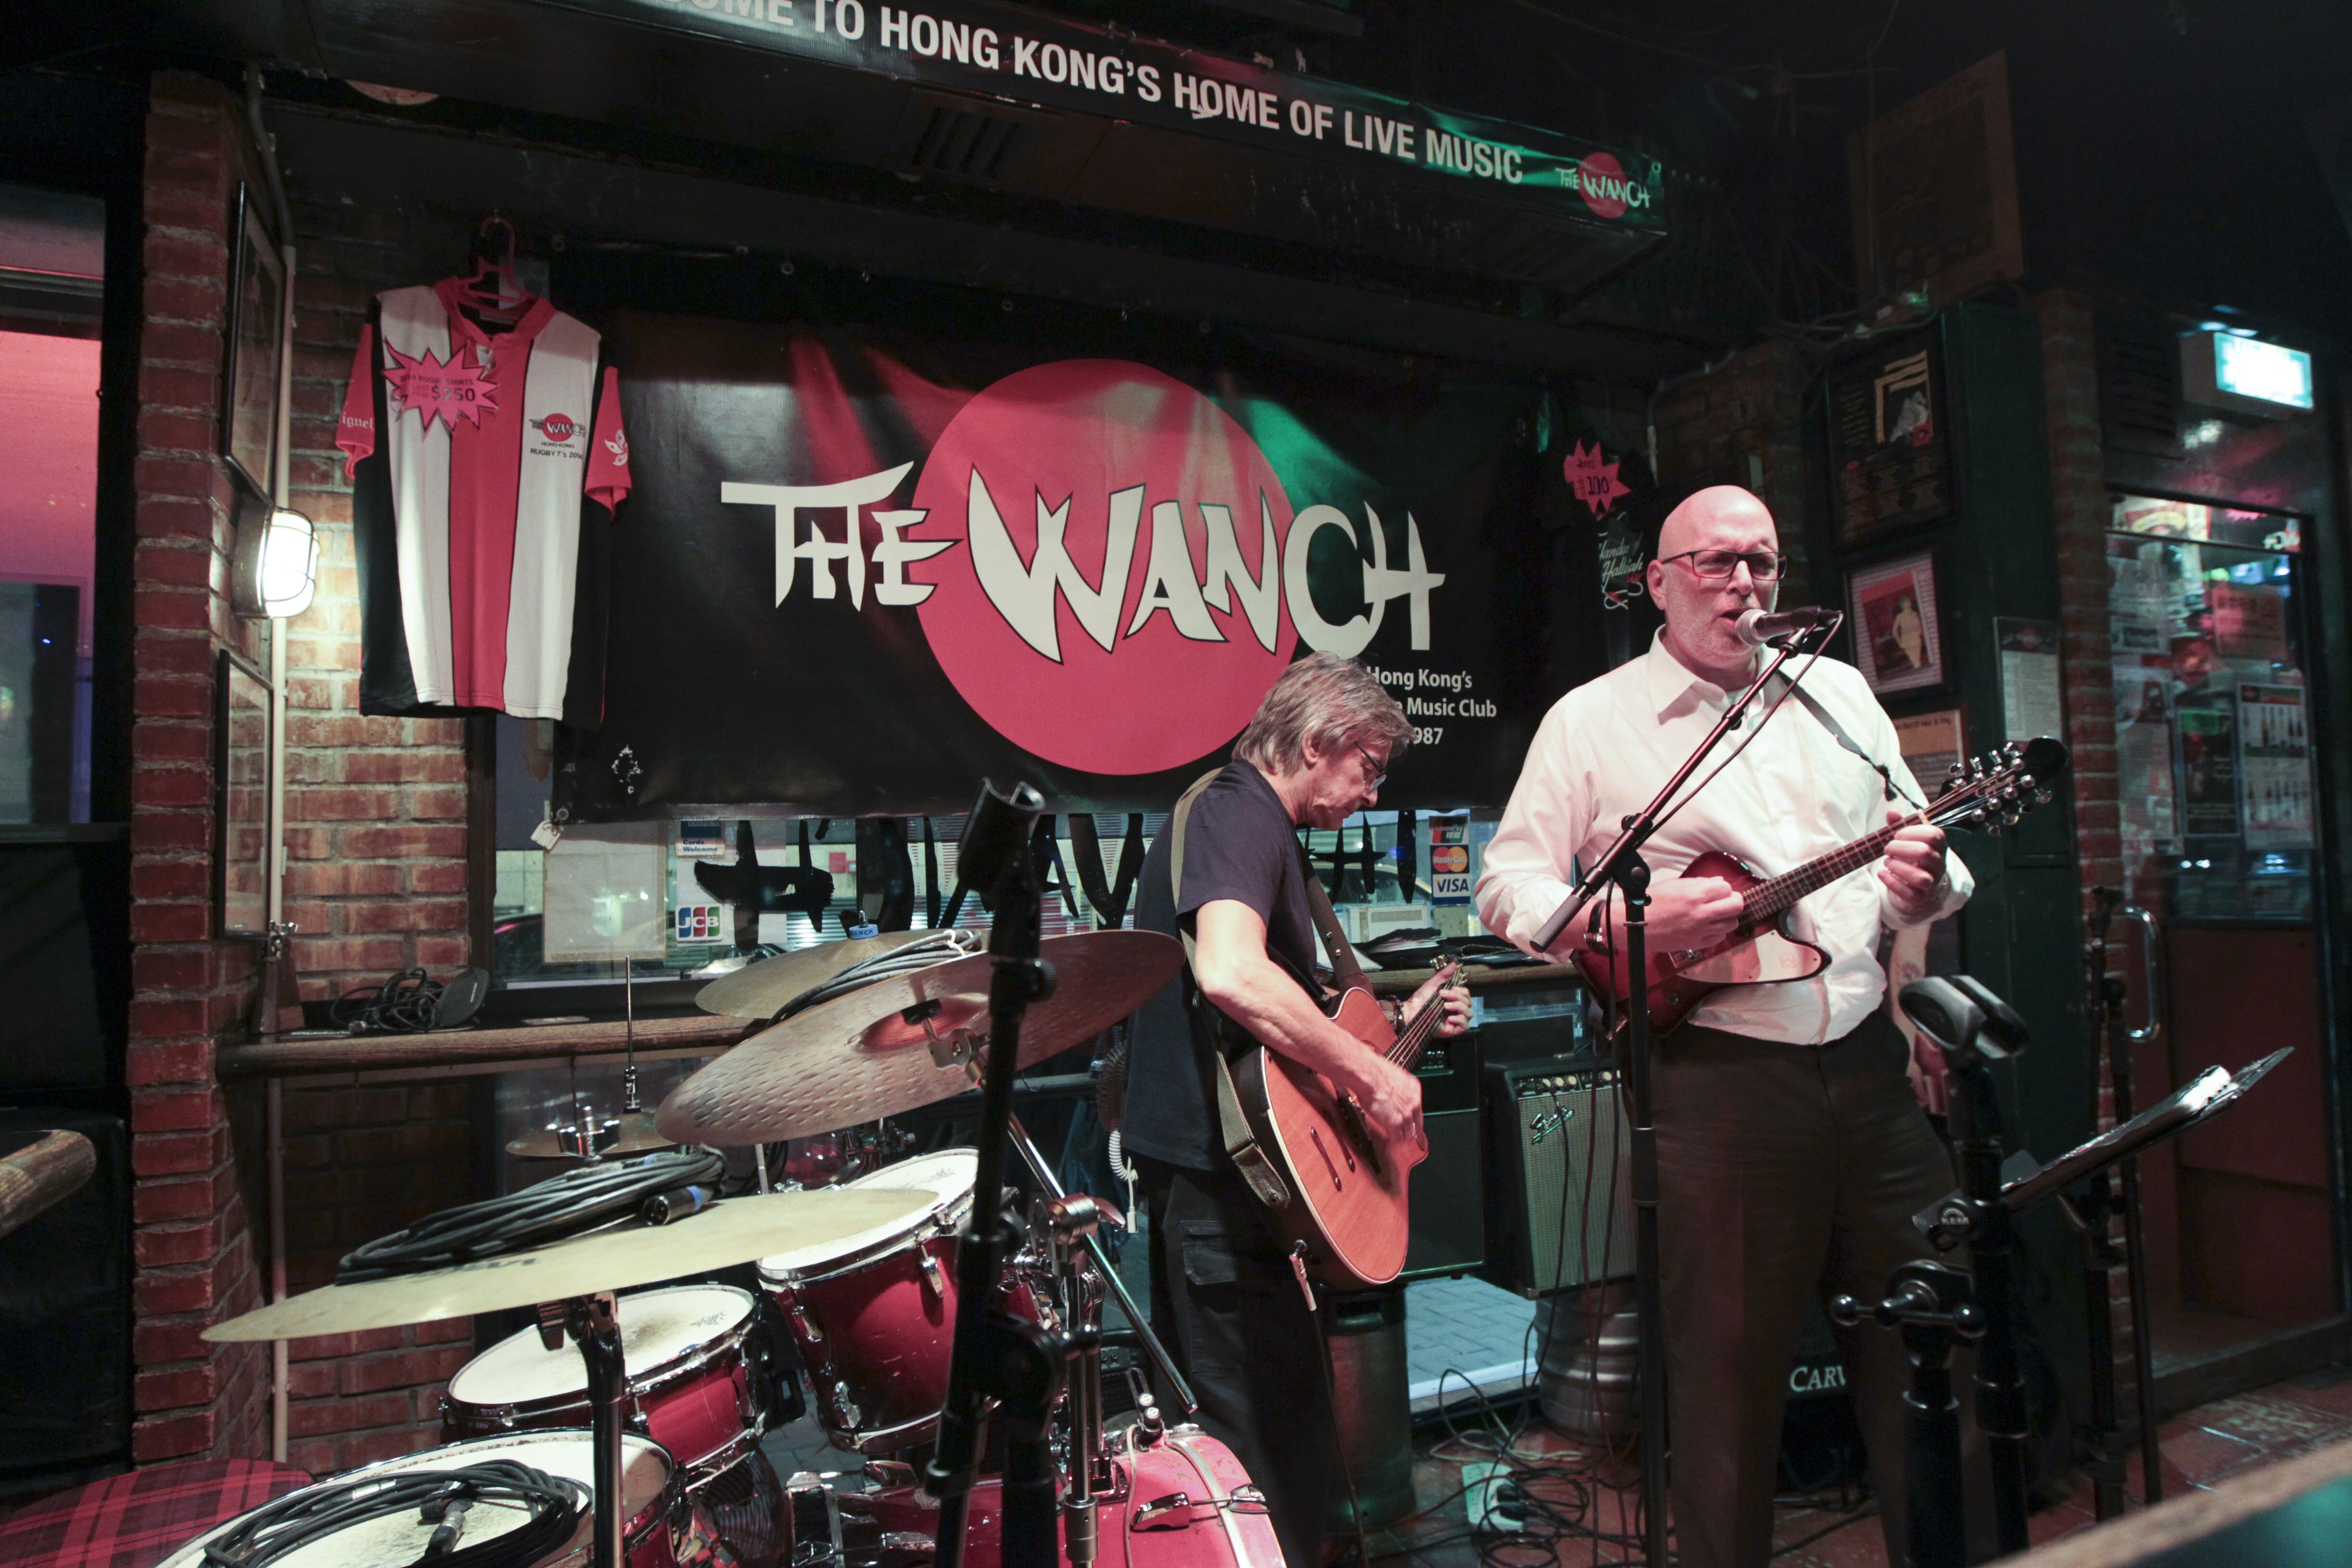 A band playing at The Wanch. Photo: SCMP